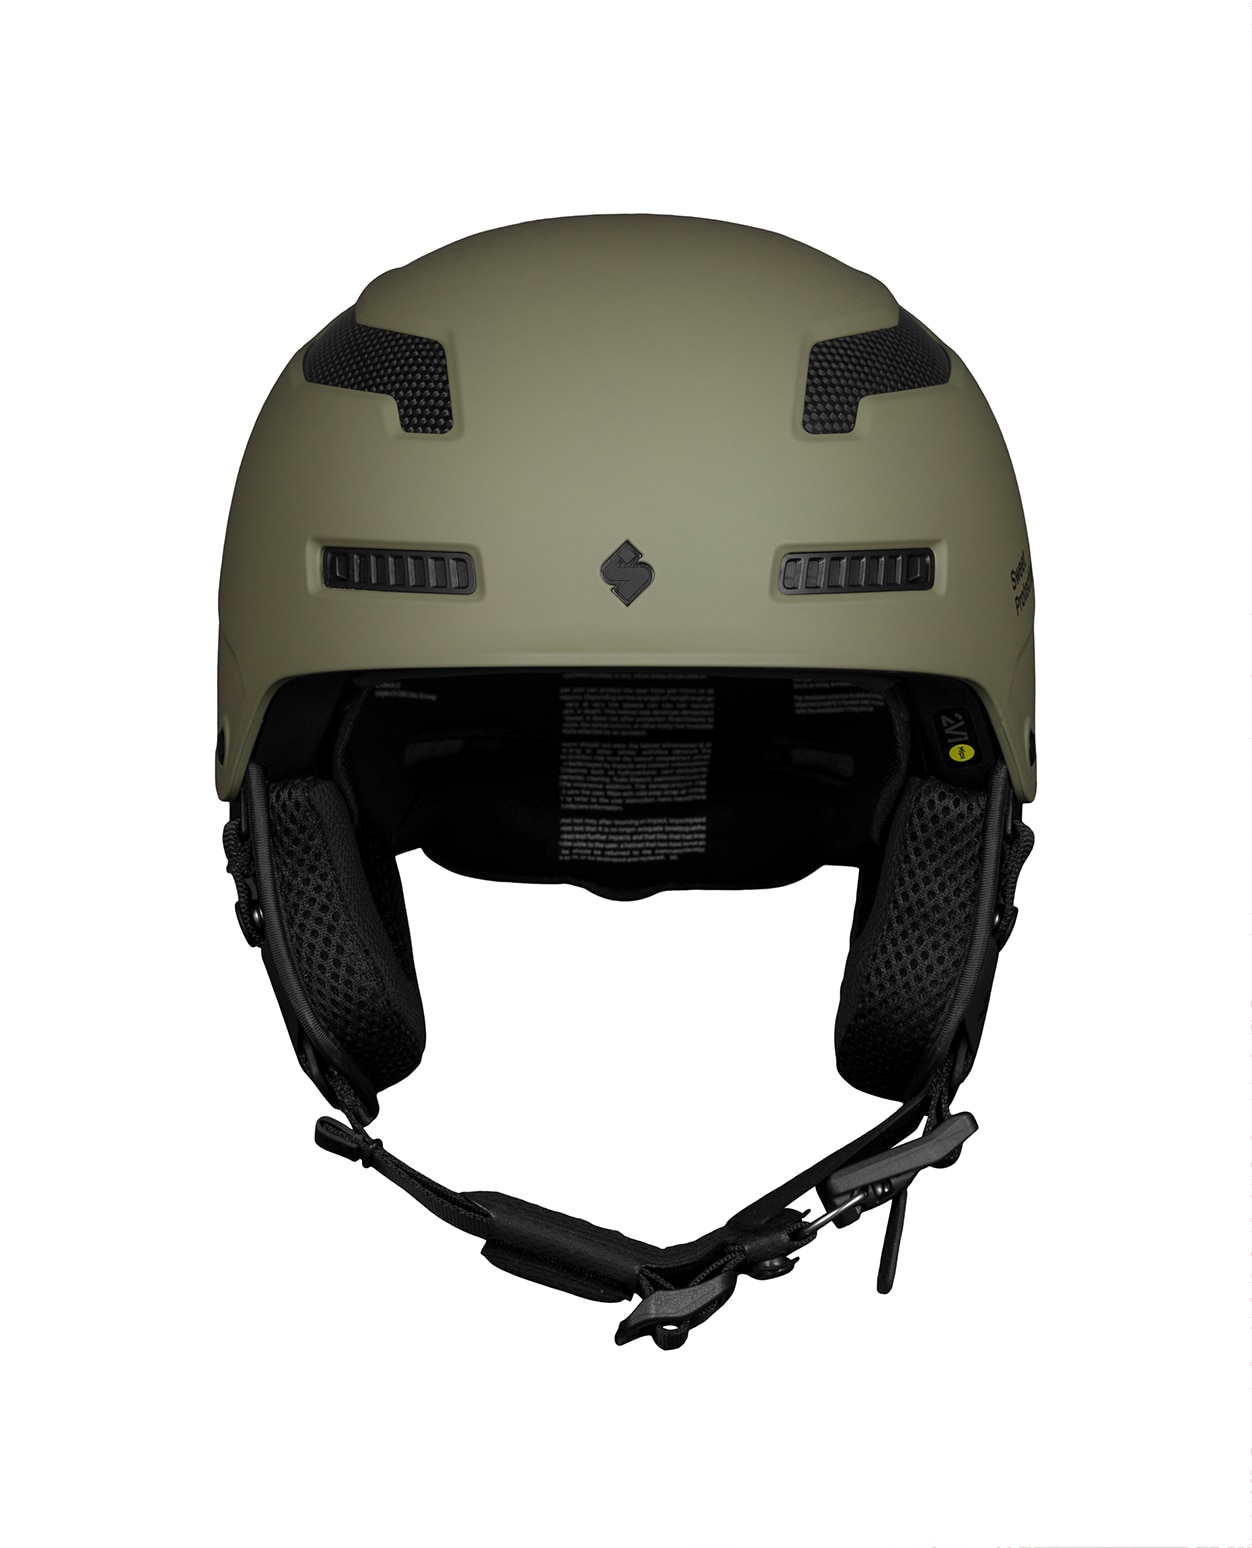 Sweet Protection Trooper 2Vi Mips Woodland